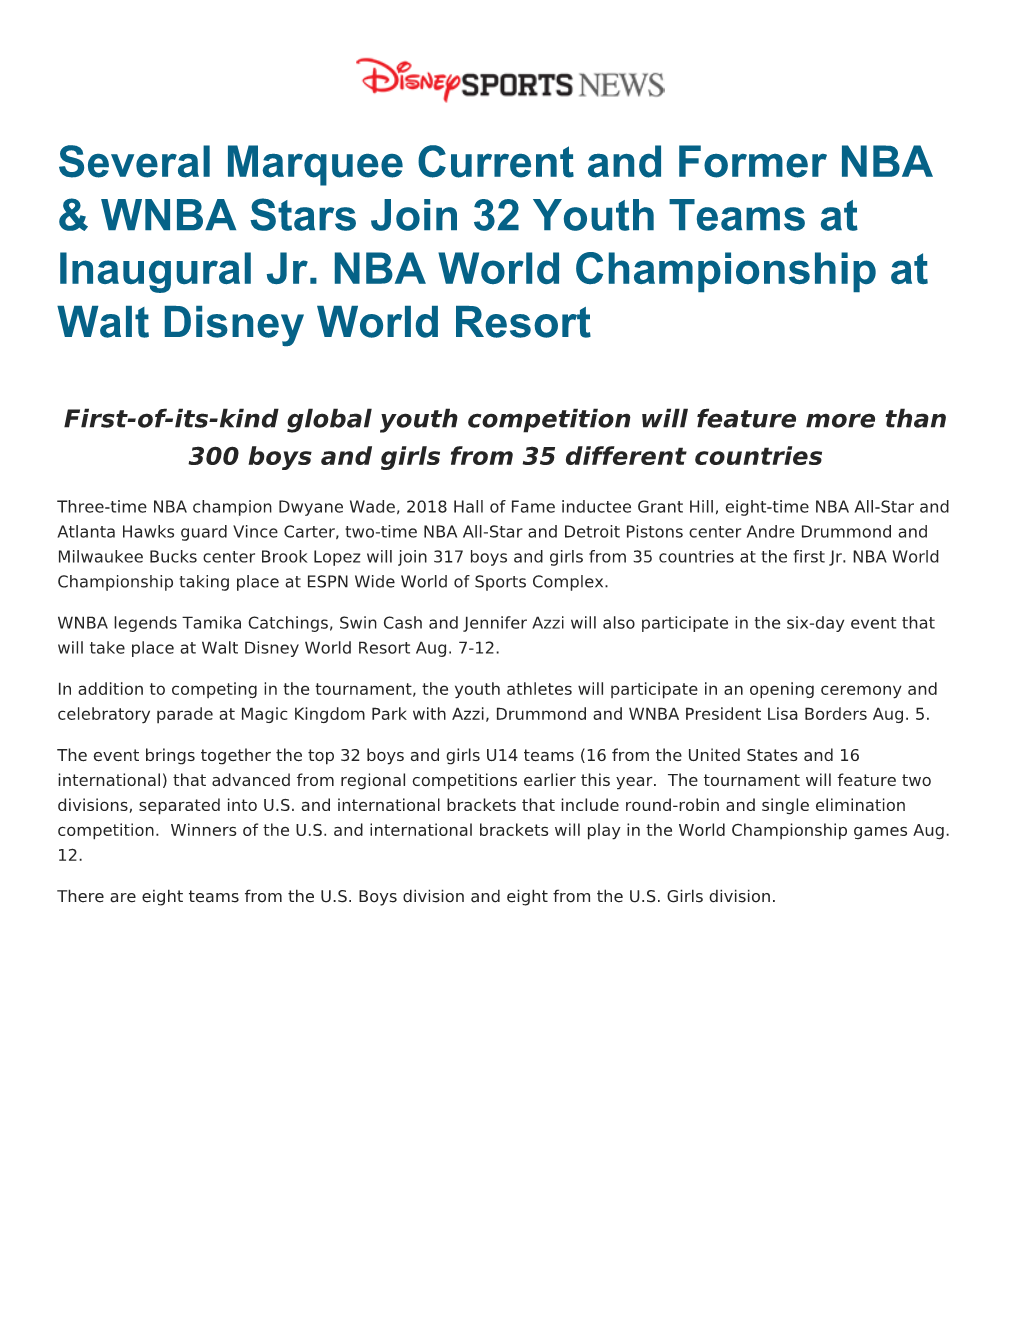 Several Marquee Current and Former NBA & WNBA Stars Join 32 Youth Teams at Inaugural Jr